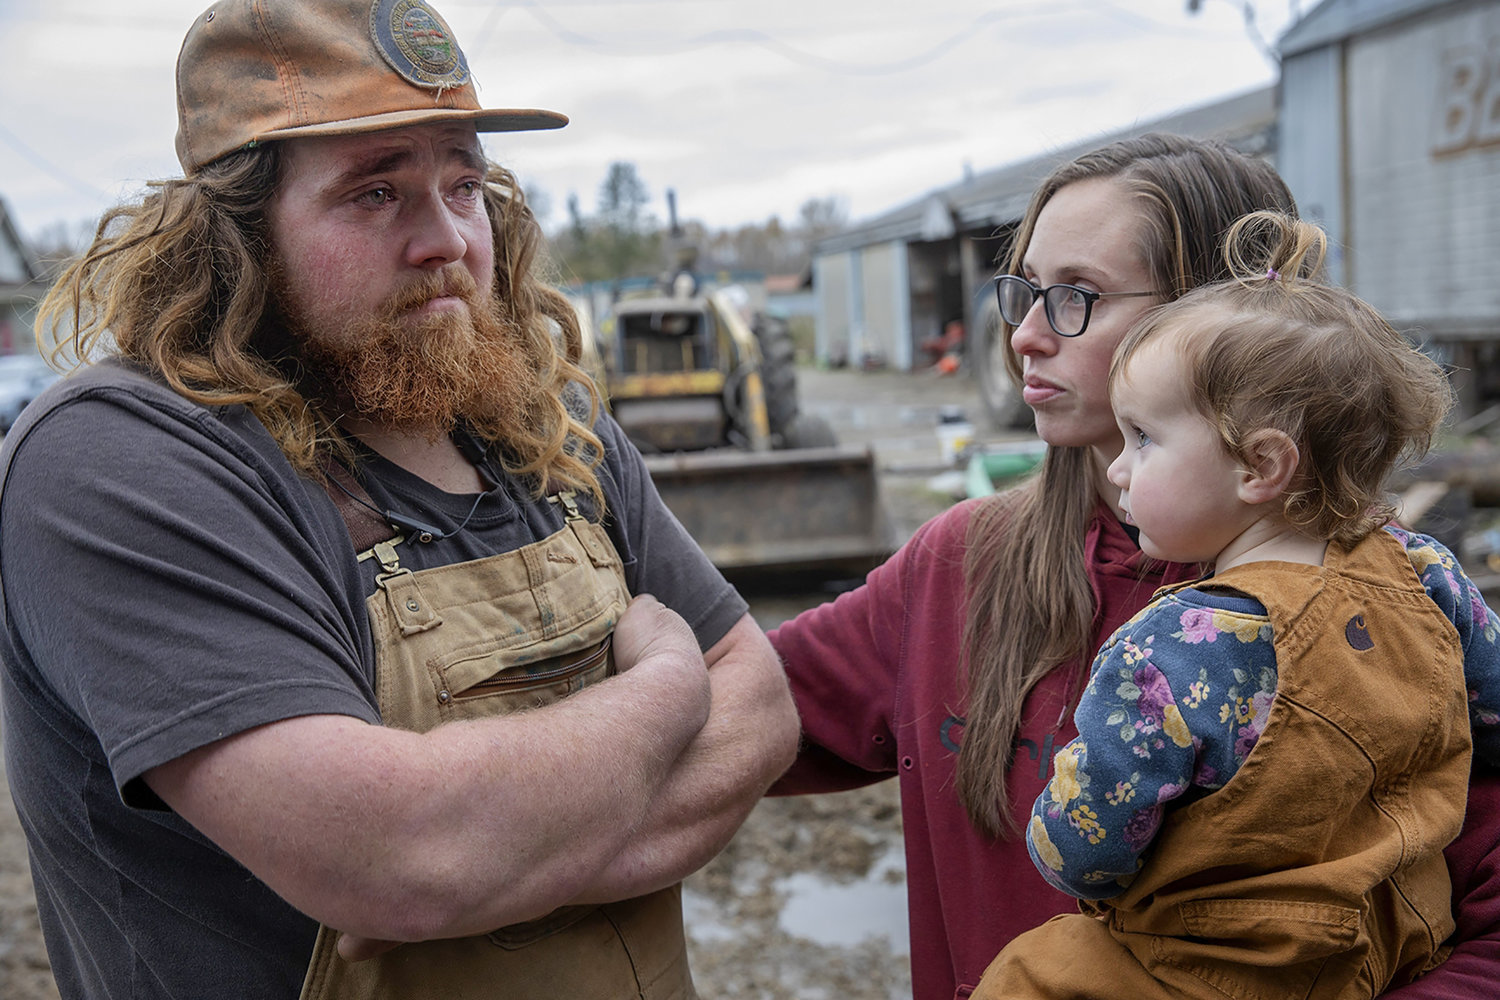 Jordan Baumgardner, left, is consoled by his wife, Jamie, who holds their daughter, Grace, on Nov. 24, 2021, in Mount Vernon, Washington, at the family dairy farm that lost cows in flooding. Jordan, the farm's herdsman, struggled in flood waters in the night to save 250 dairy cows and is still reeling from losing 44 of them.  (Ken Lambert/Seattle Times/TNS)